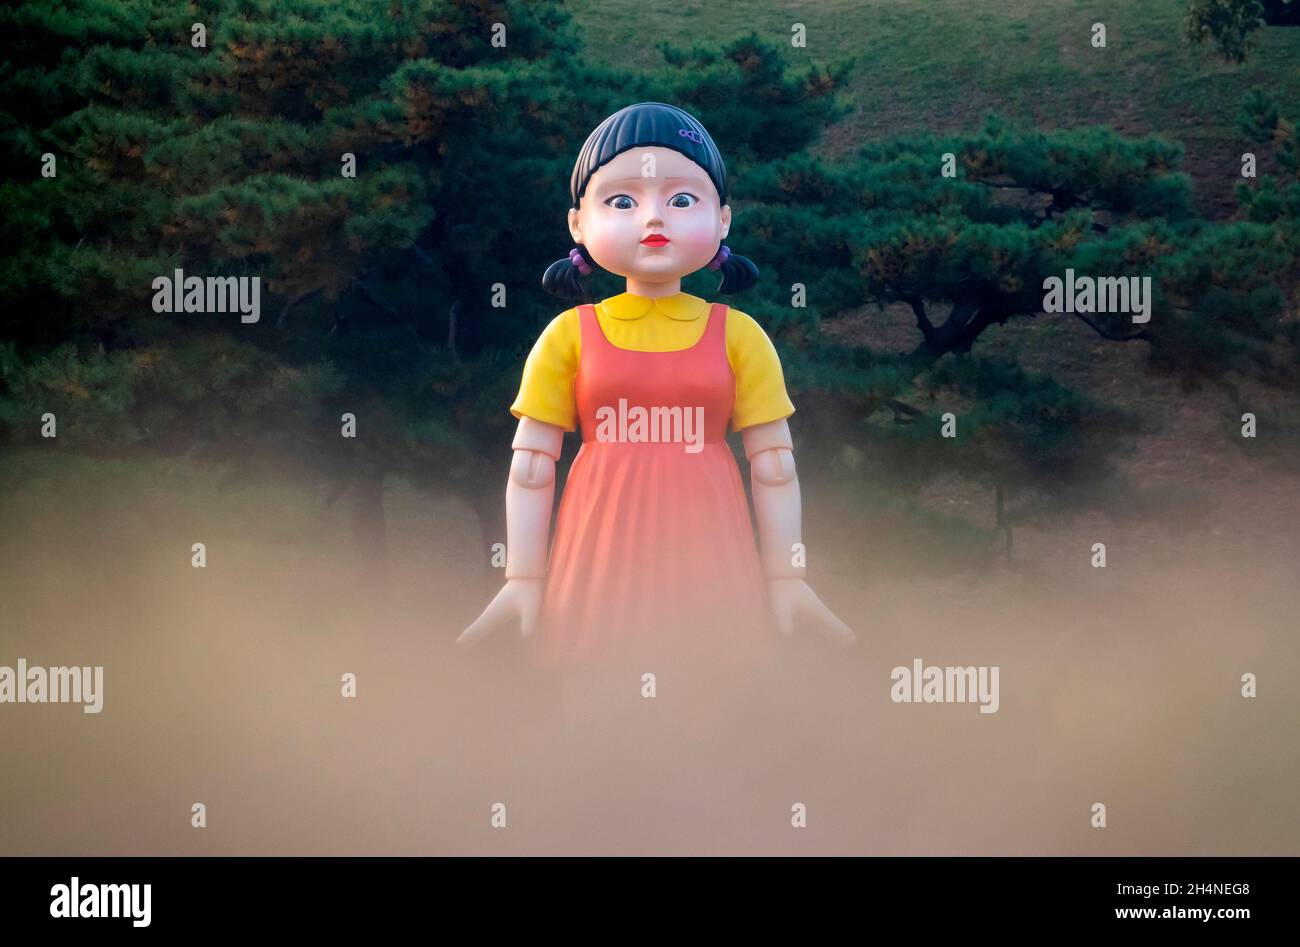 YoungHee, Nov 2, 2021 : A replica of the giant doll called 'YoungHee' which appears in Netflix series 'Squid Game' is displayed at the Olympic Park in Seoul, South Korea. Credit: Lee Jae-Won/AFLO/Alamy Live News Stock Photo